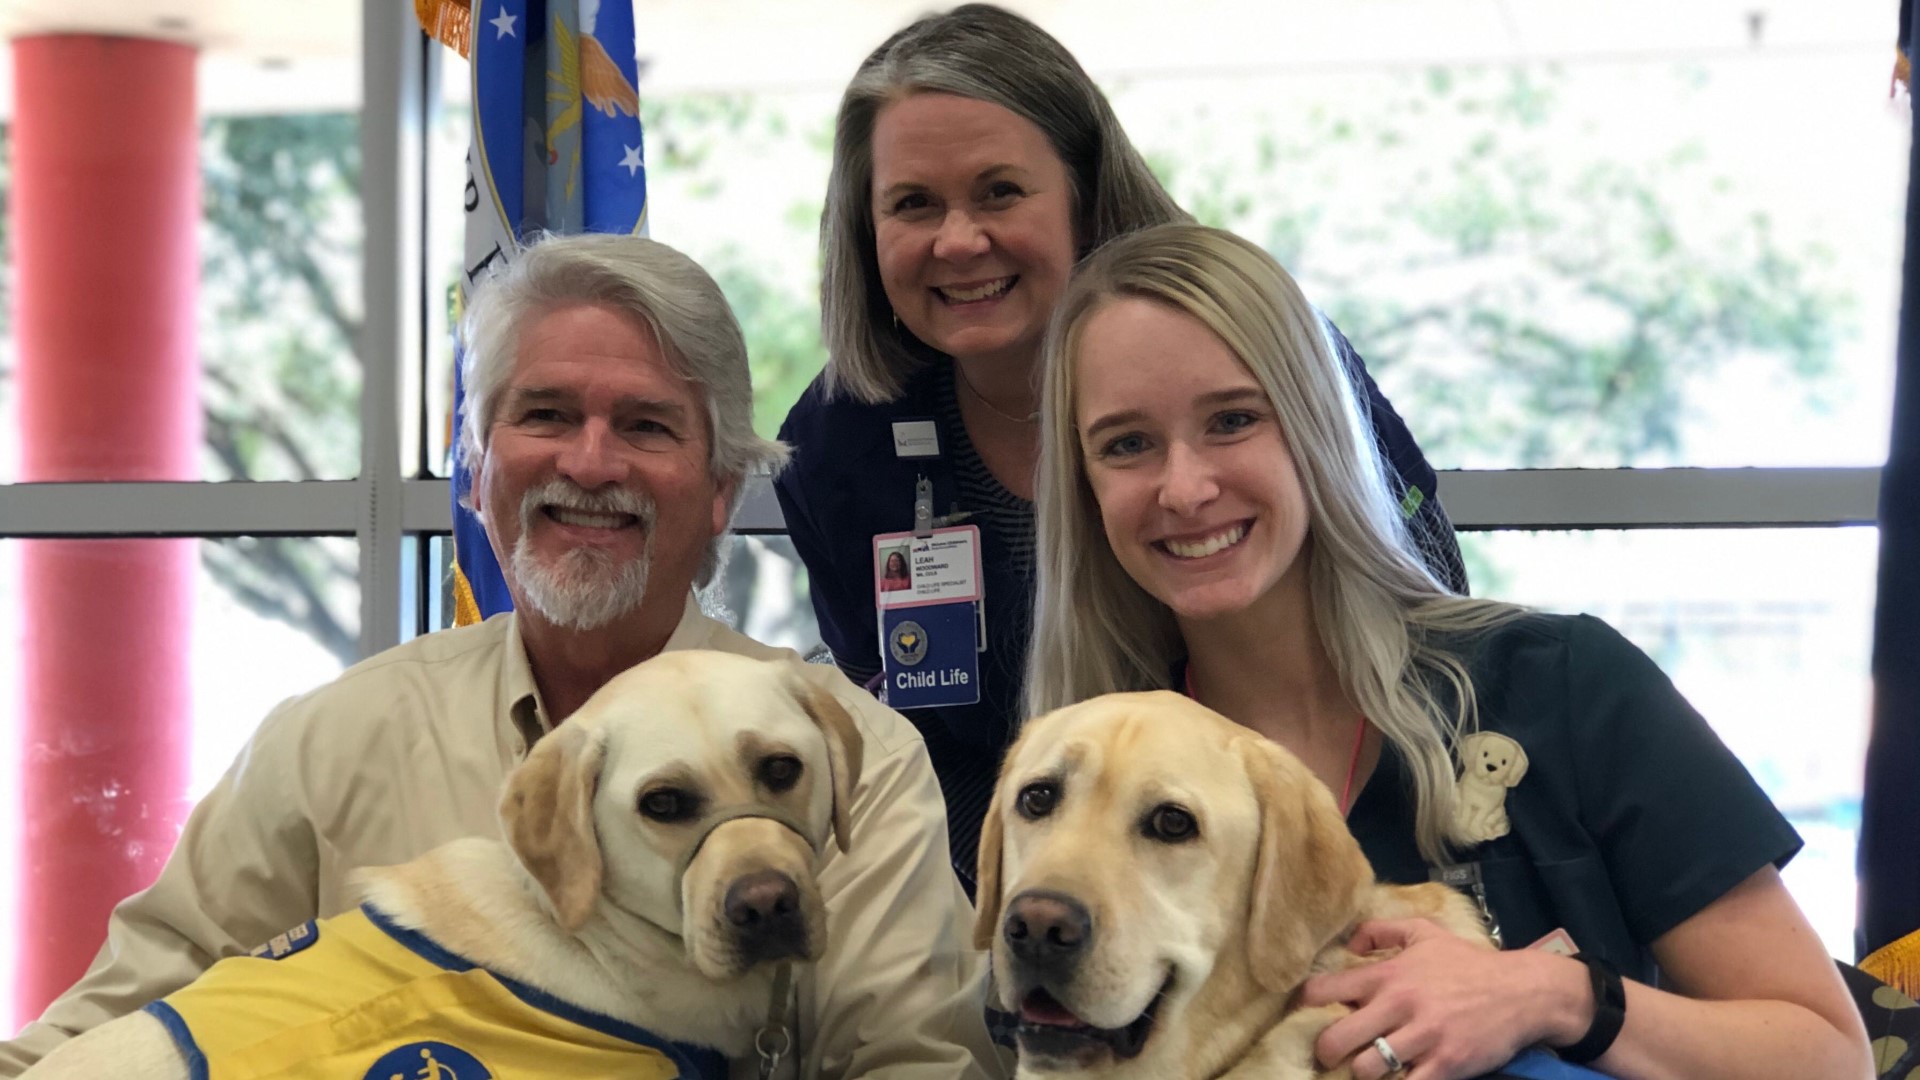 CCI is a national non-profit that provides assistance dogs, free of charge, to adults, children and veterans with disabilities.